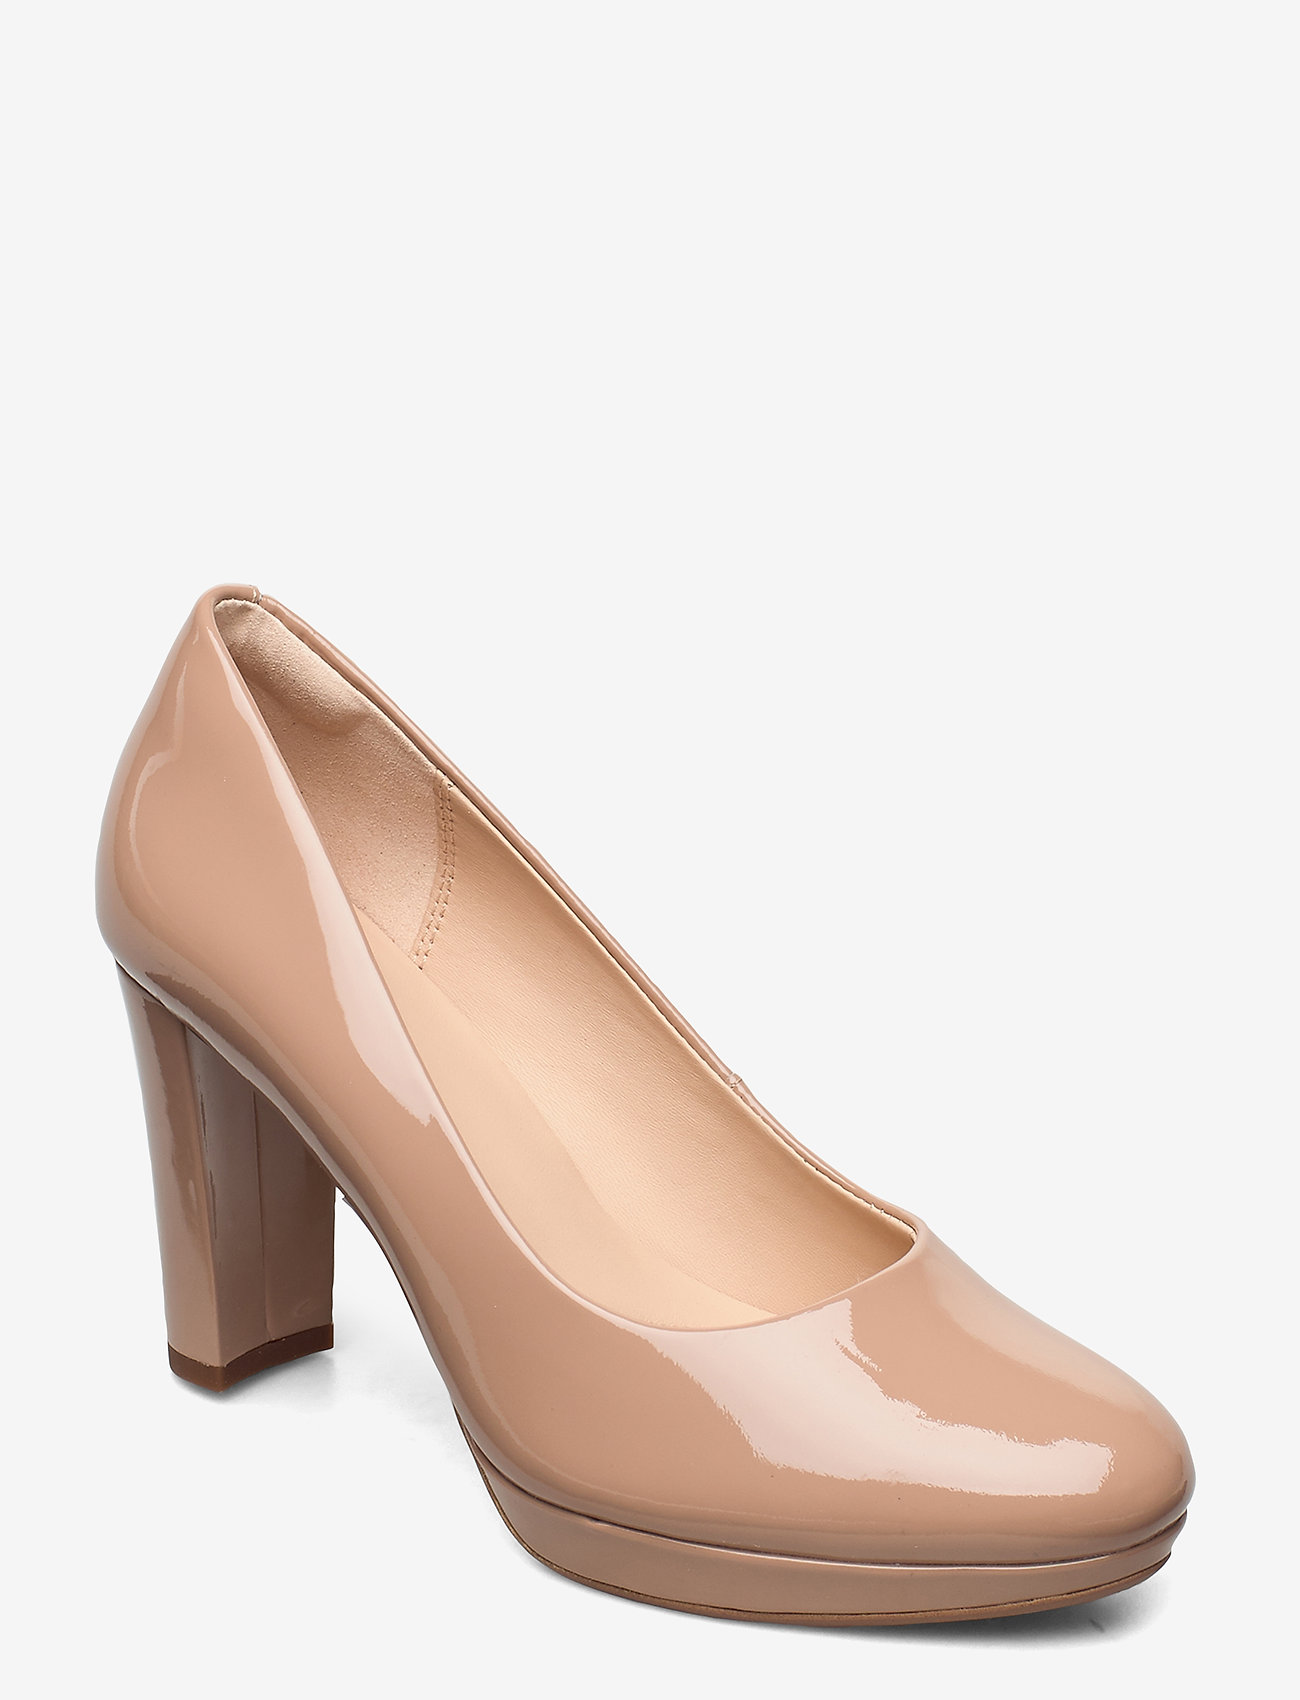 clarks kendra sienna shoes